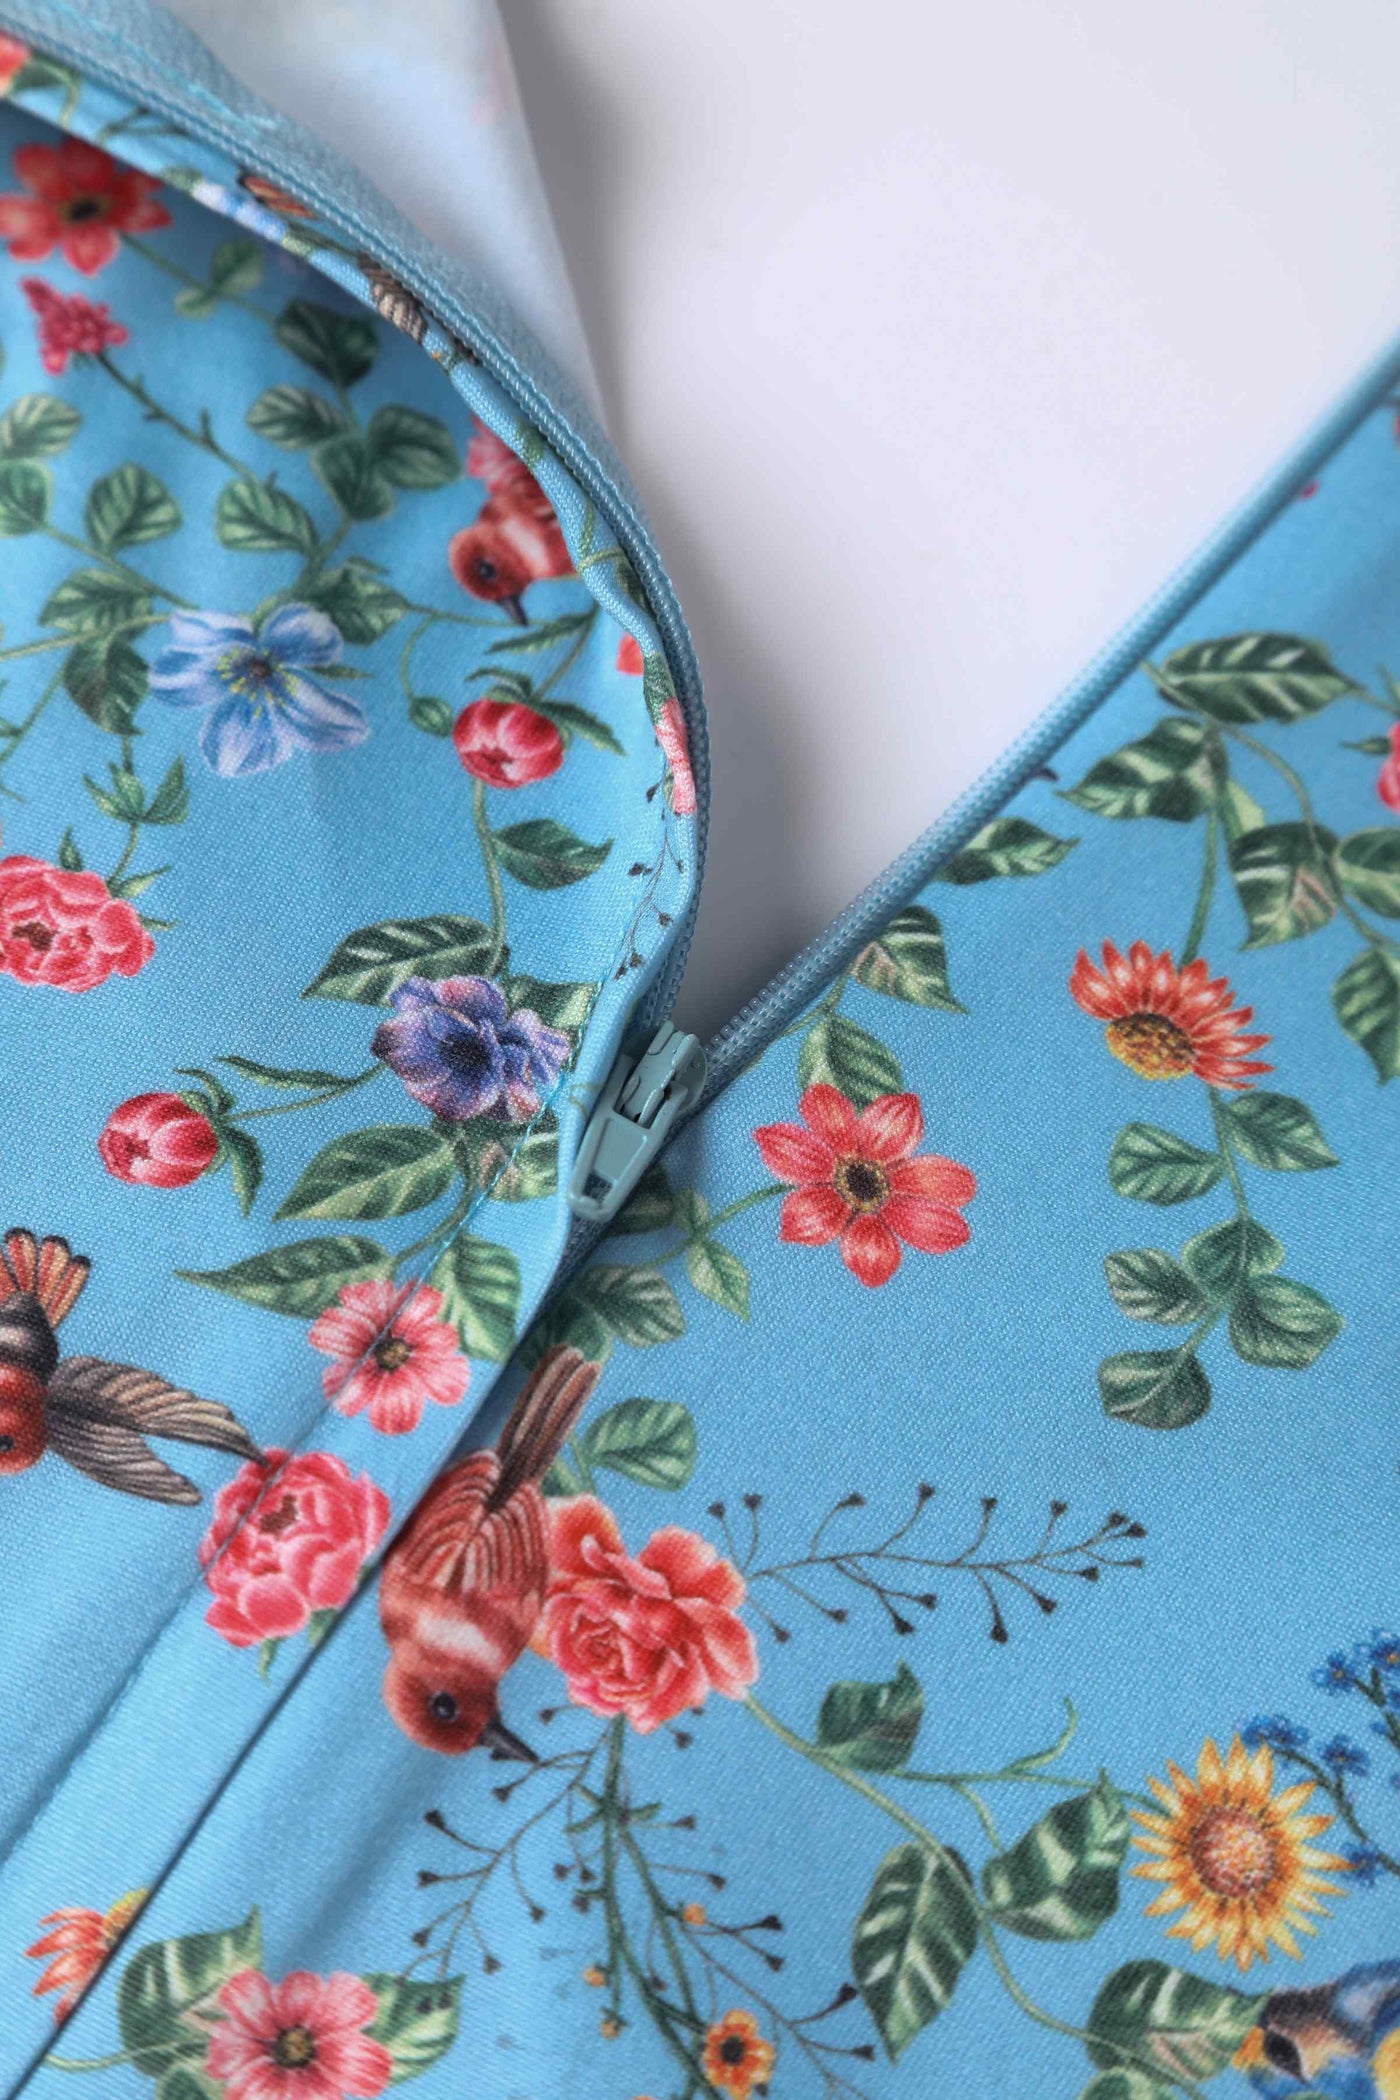 Close up view of Hummingbird Print Long Sleeved Dress in Blue